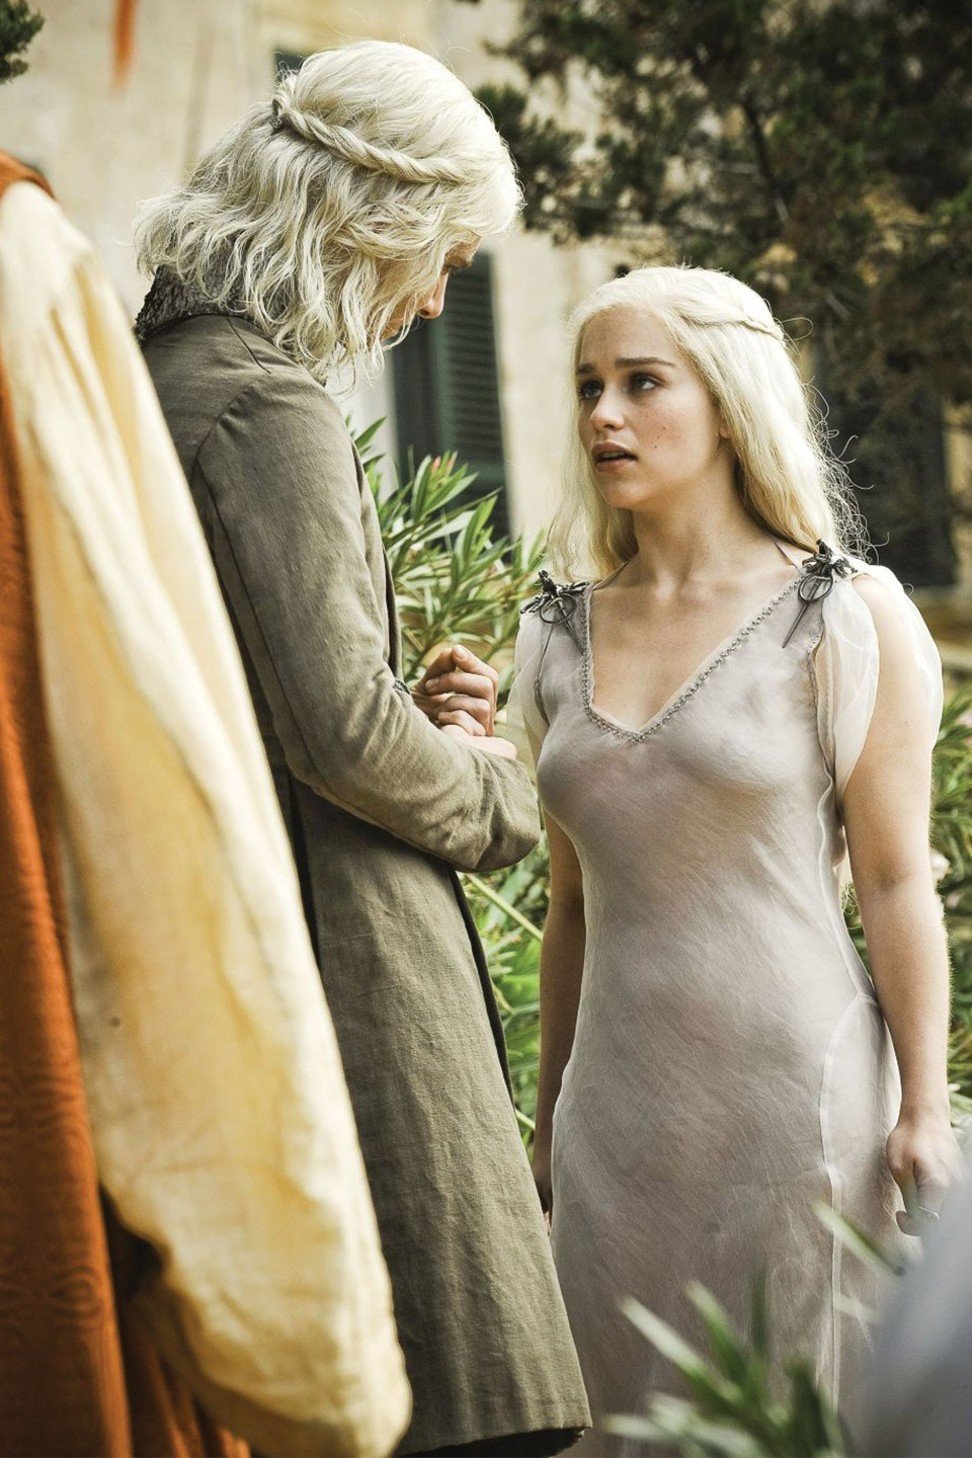 Our first glimpse of a young Daenerys Targaryen (right), portrayed by Emilia Clarke, with Viserys Targaryen, played by Harry Lloyd, in Season 1 of Game of Thrones.